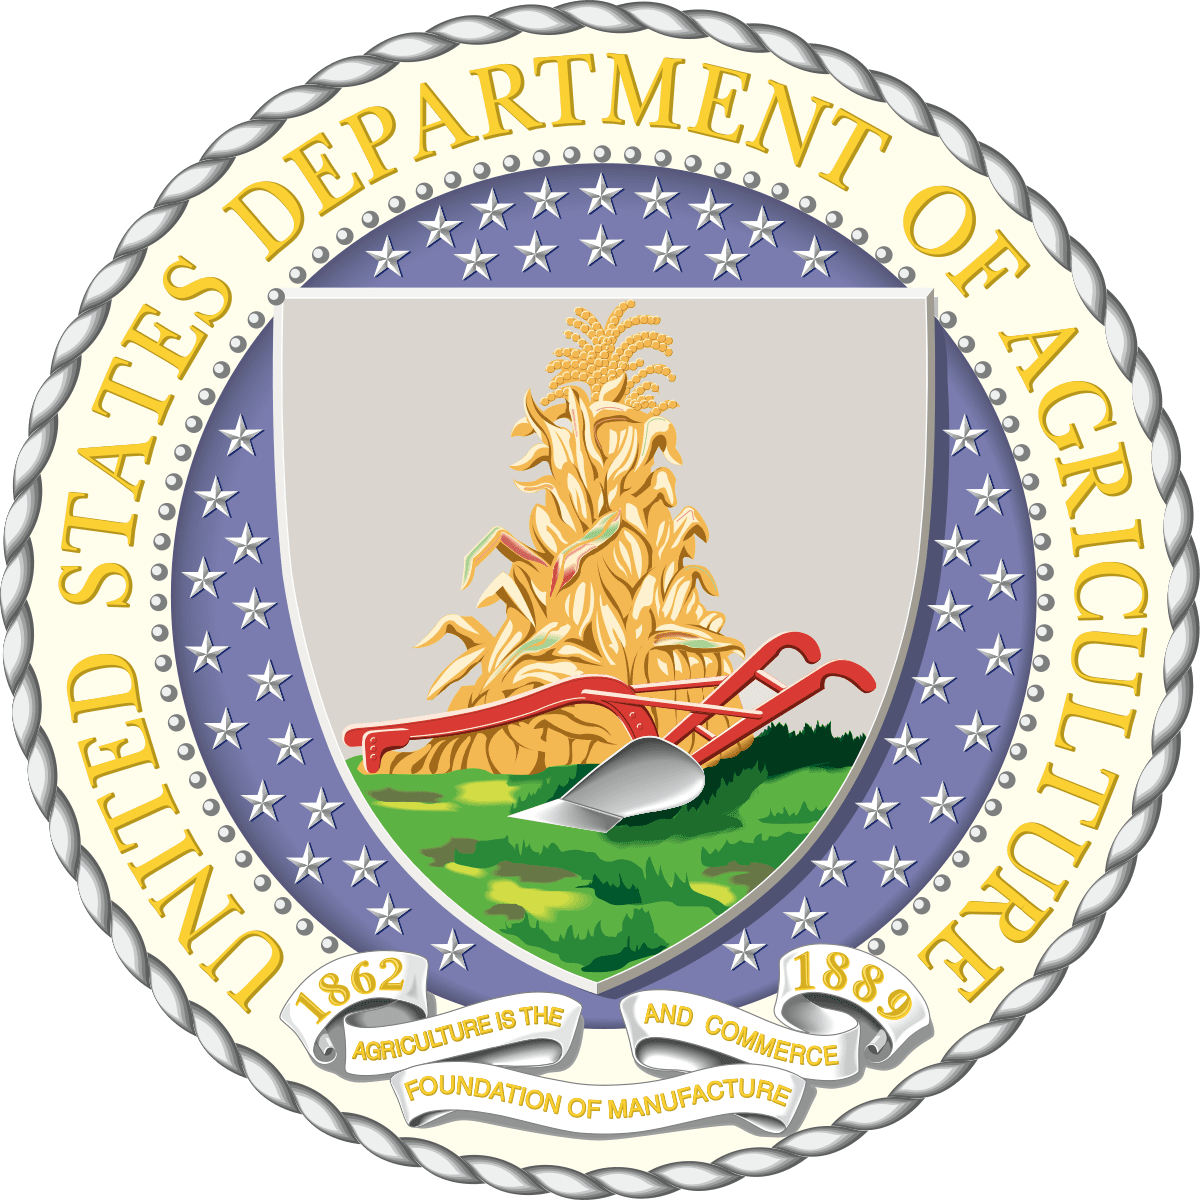 Seal of the United States Department of Agriculture